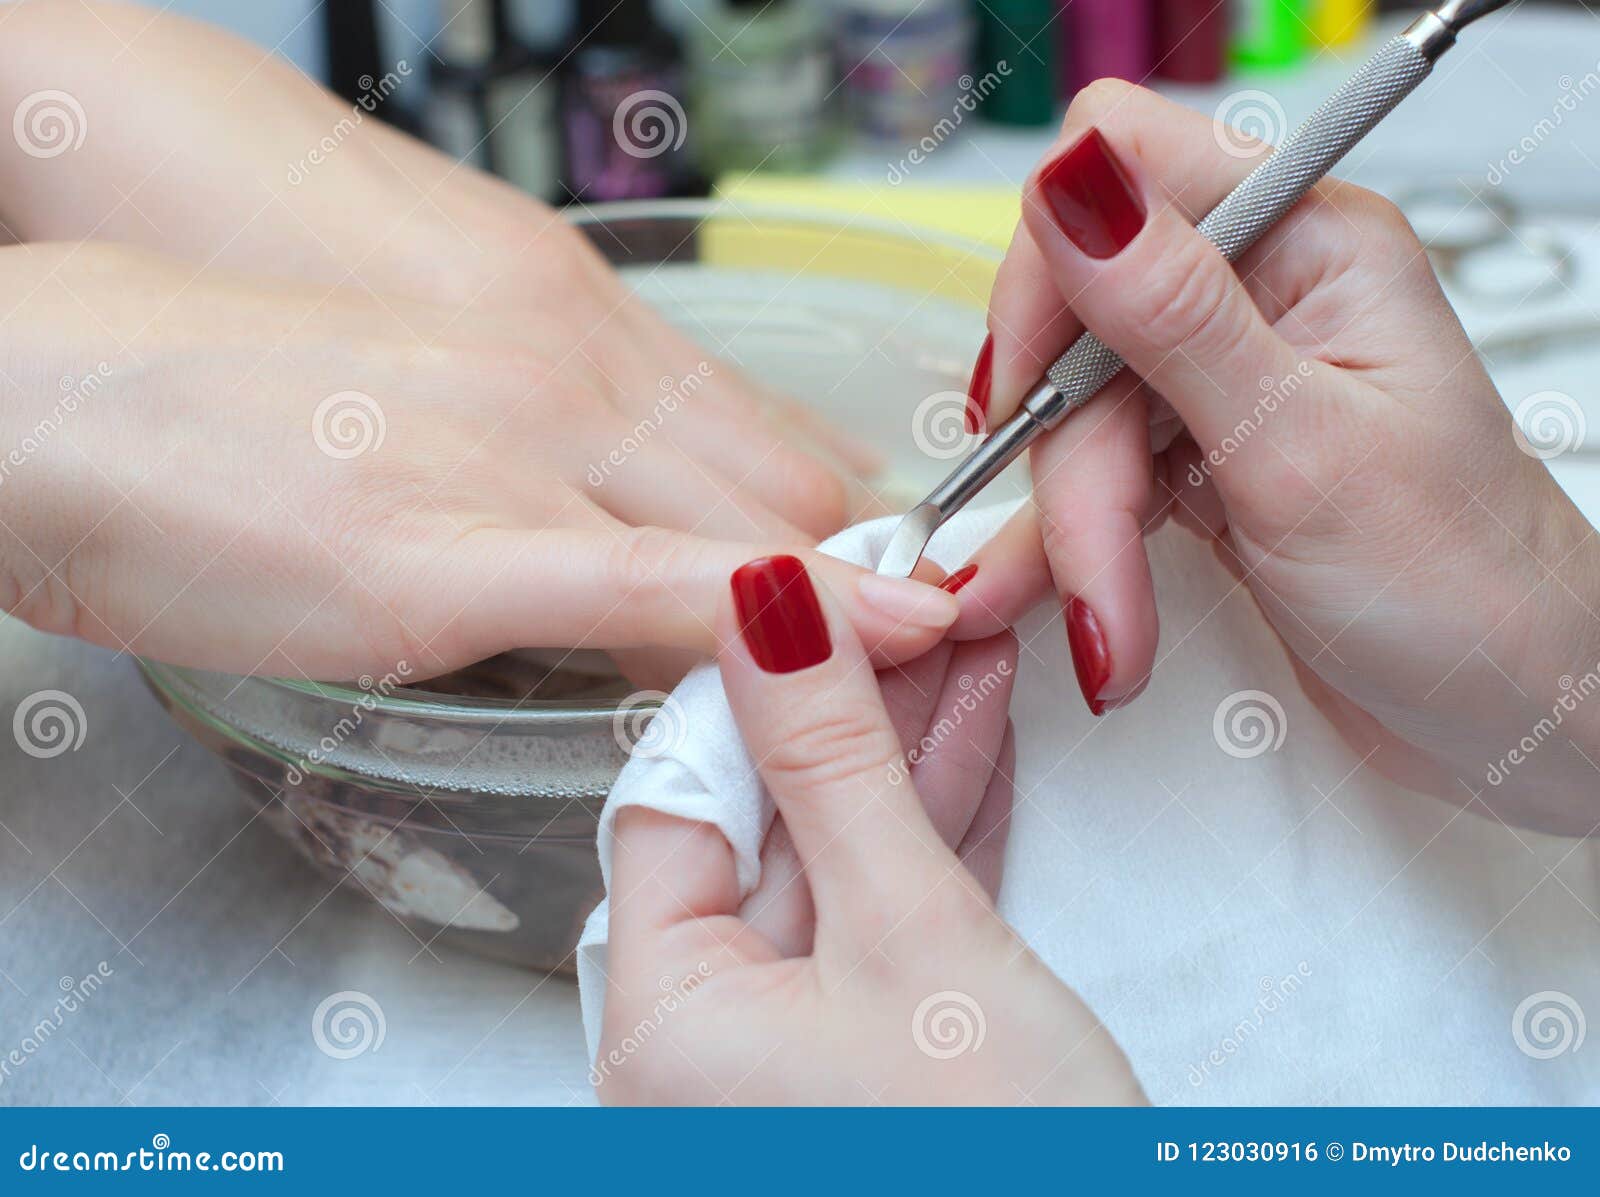 nail technician cuts the cuticles on the hands in the beauty salon.